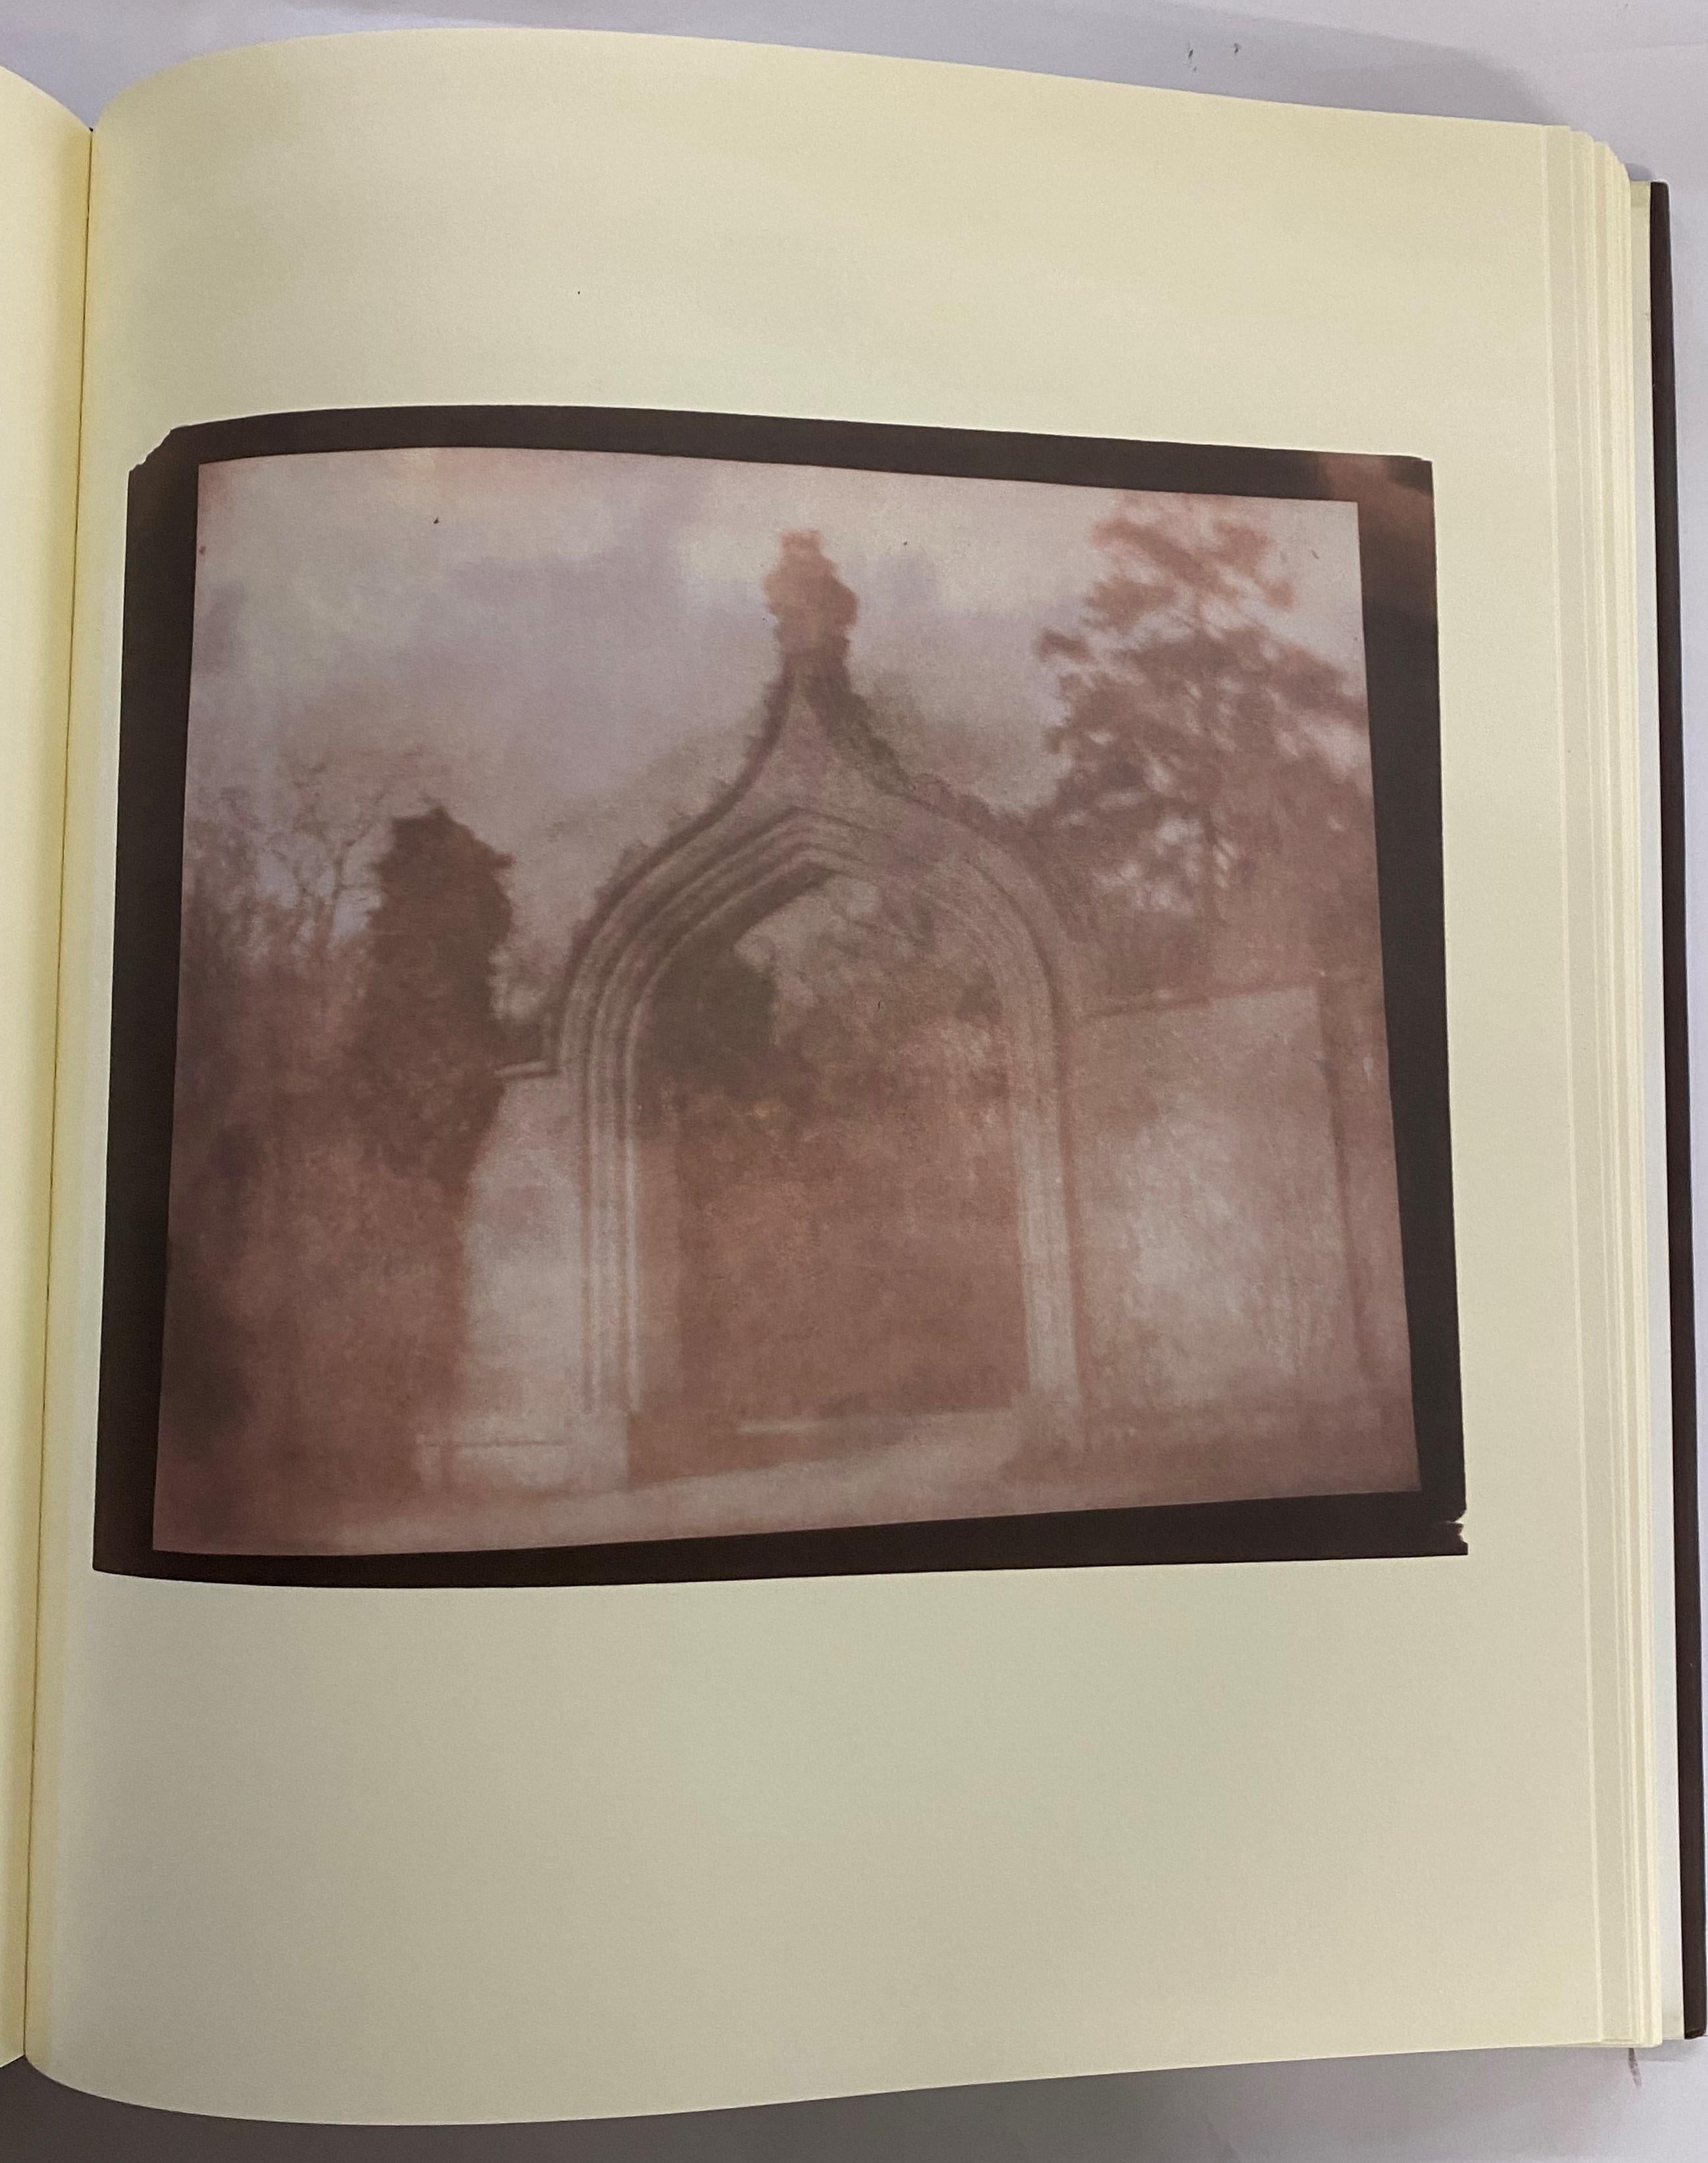 Paper The Photographic Art of William Henry Fox Talbot by Larry J. Schaaf (Book) For Sale